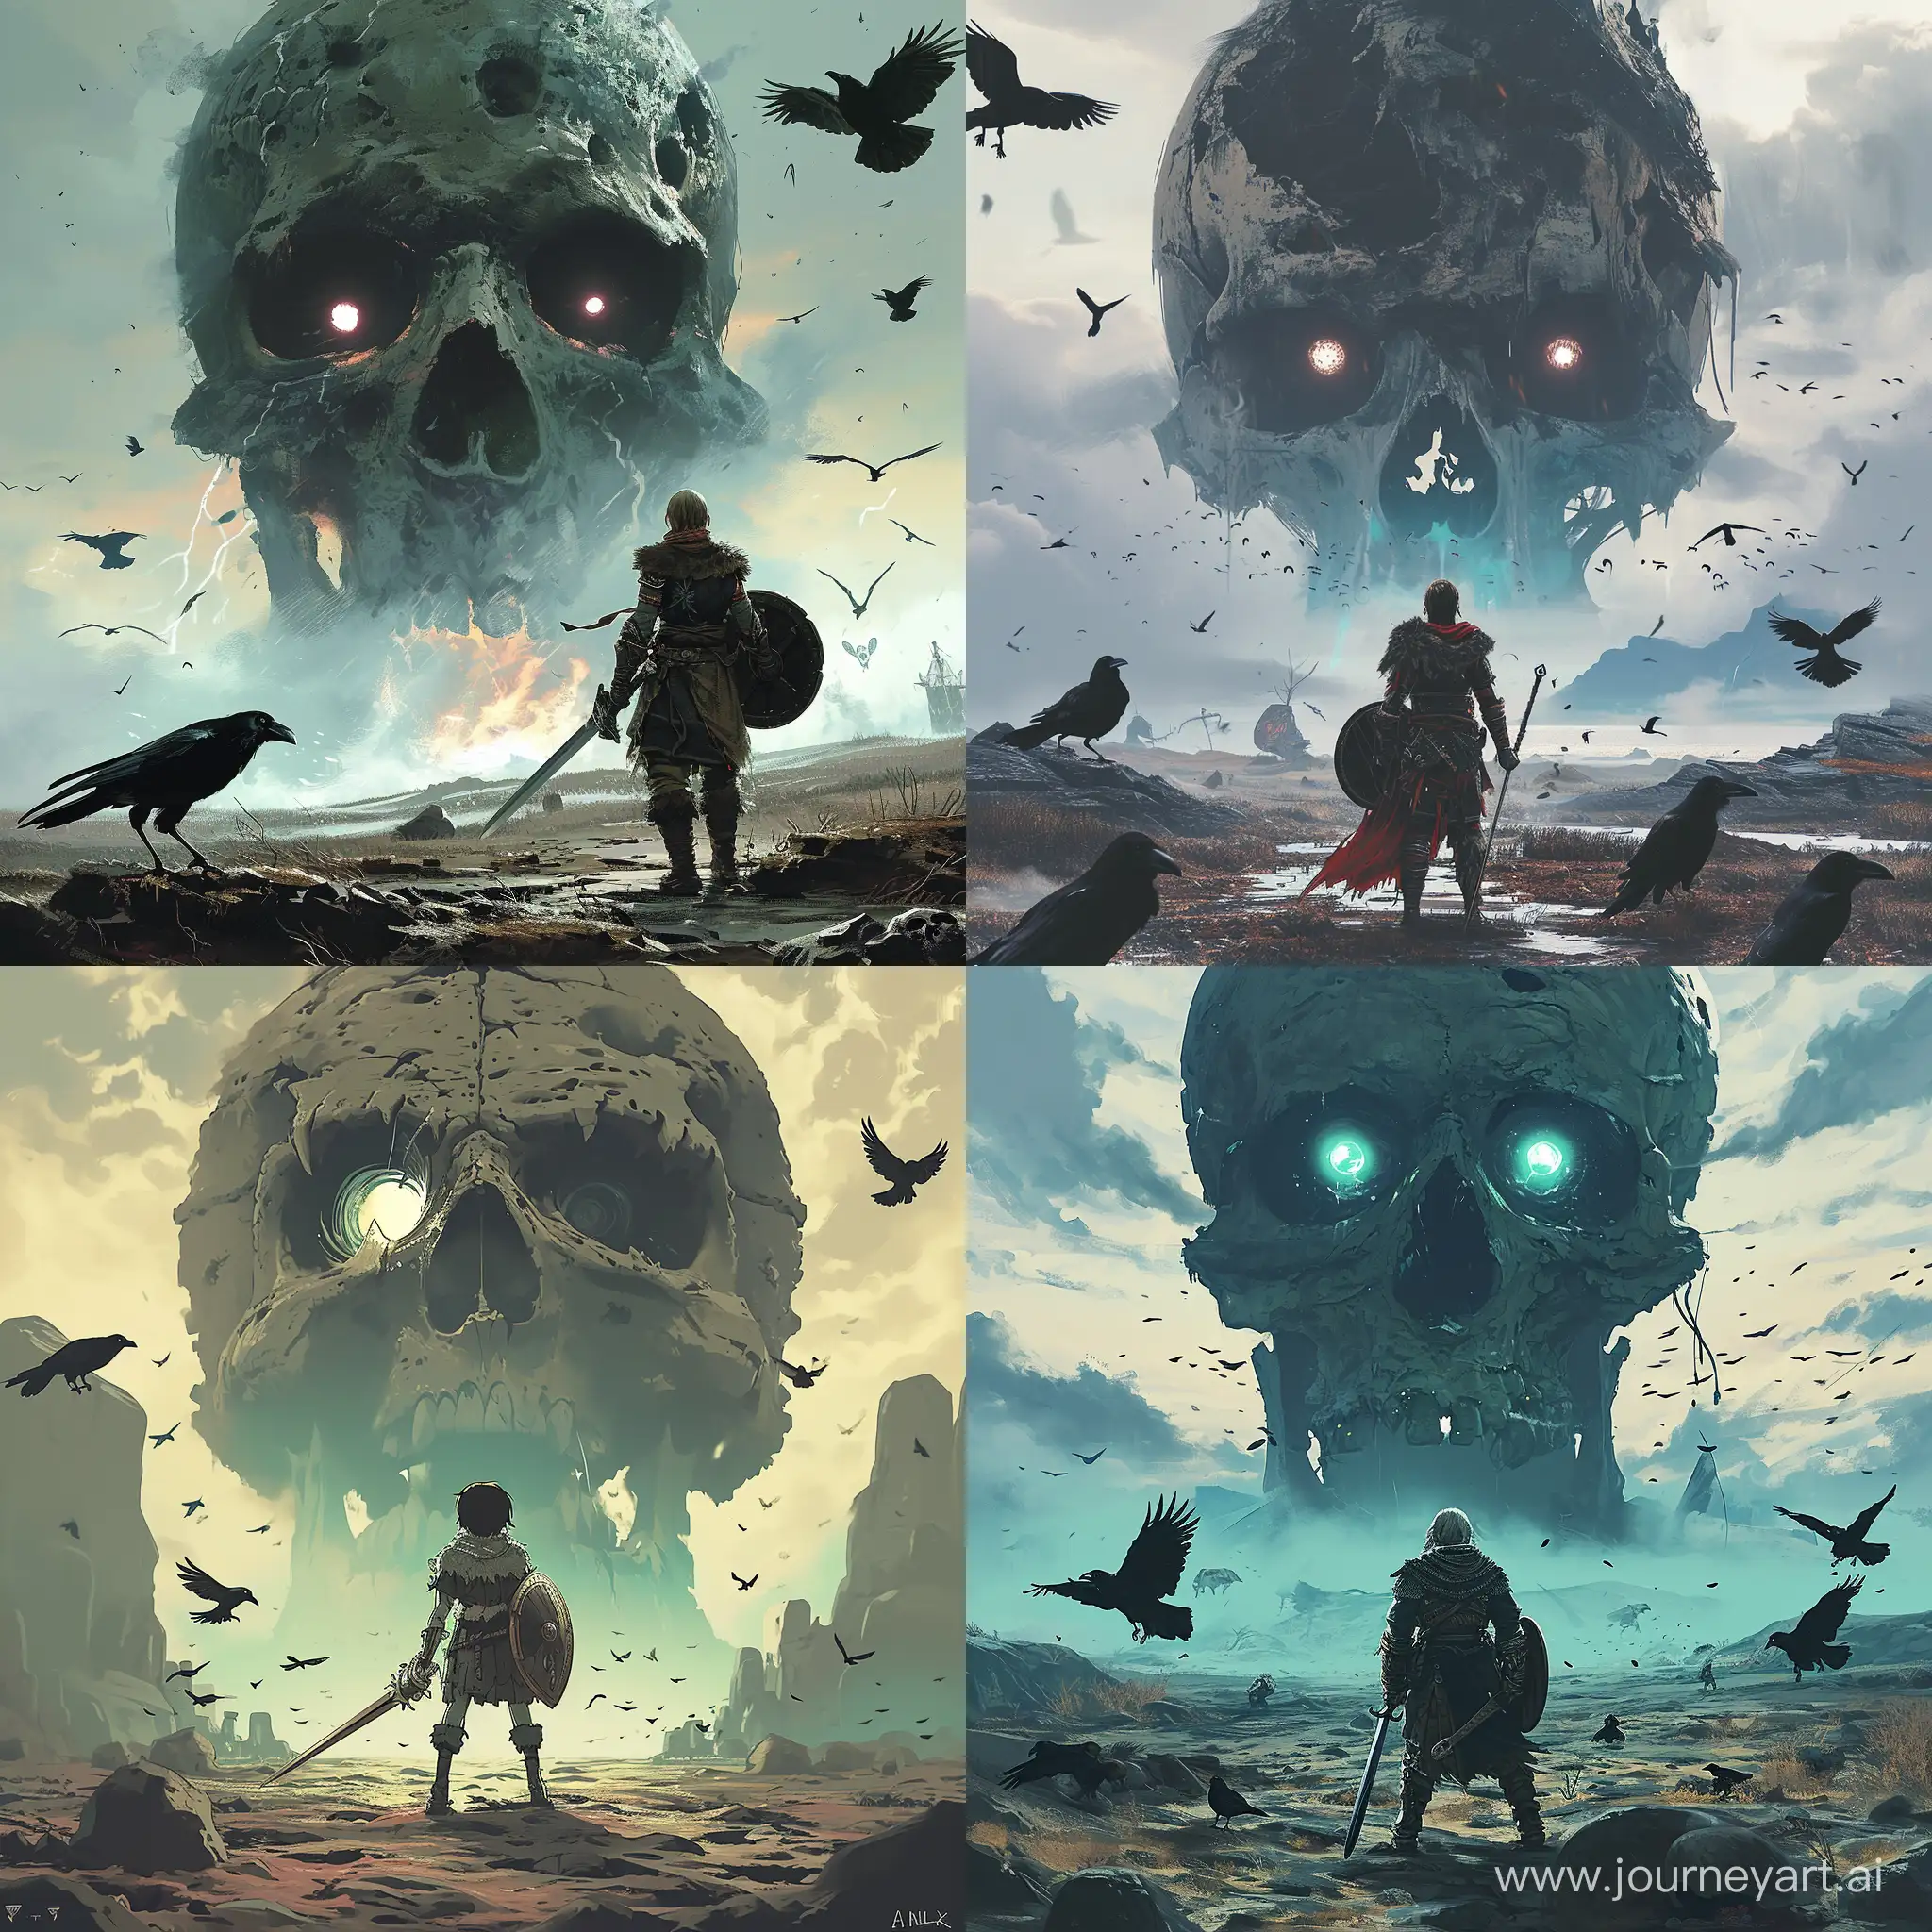 Anime warrior stands in a desolate land with a giant skull looming above them, the anime warrior is equipped with a sword and shield, there is a skull with glowing eyes in the background, there are crows flying around